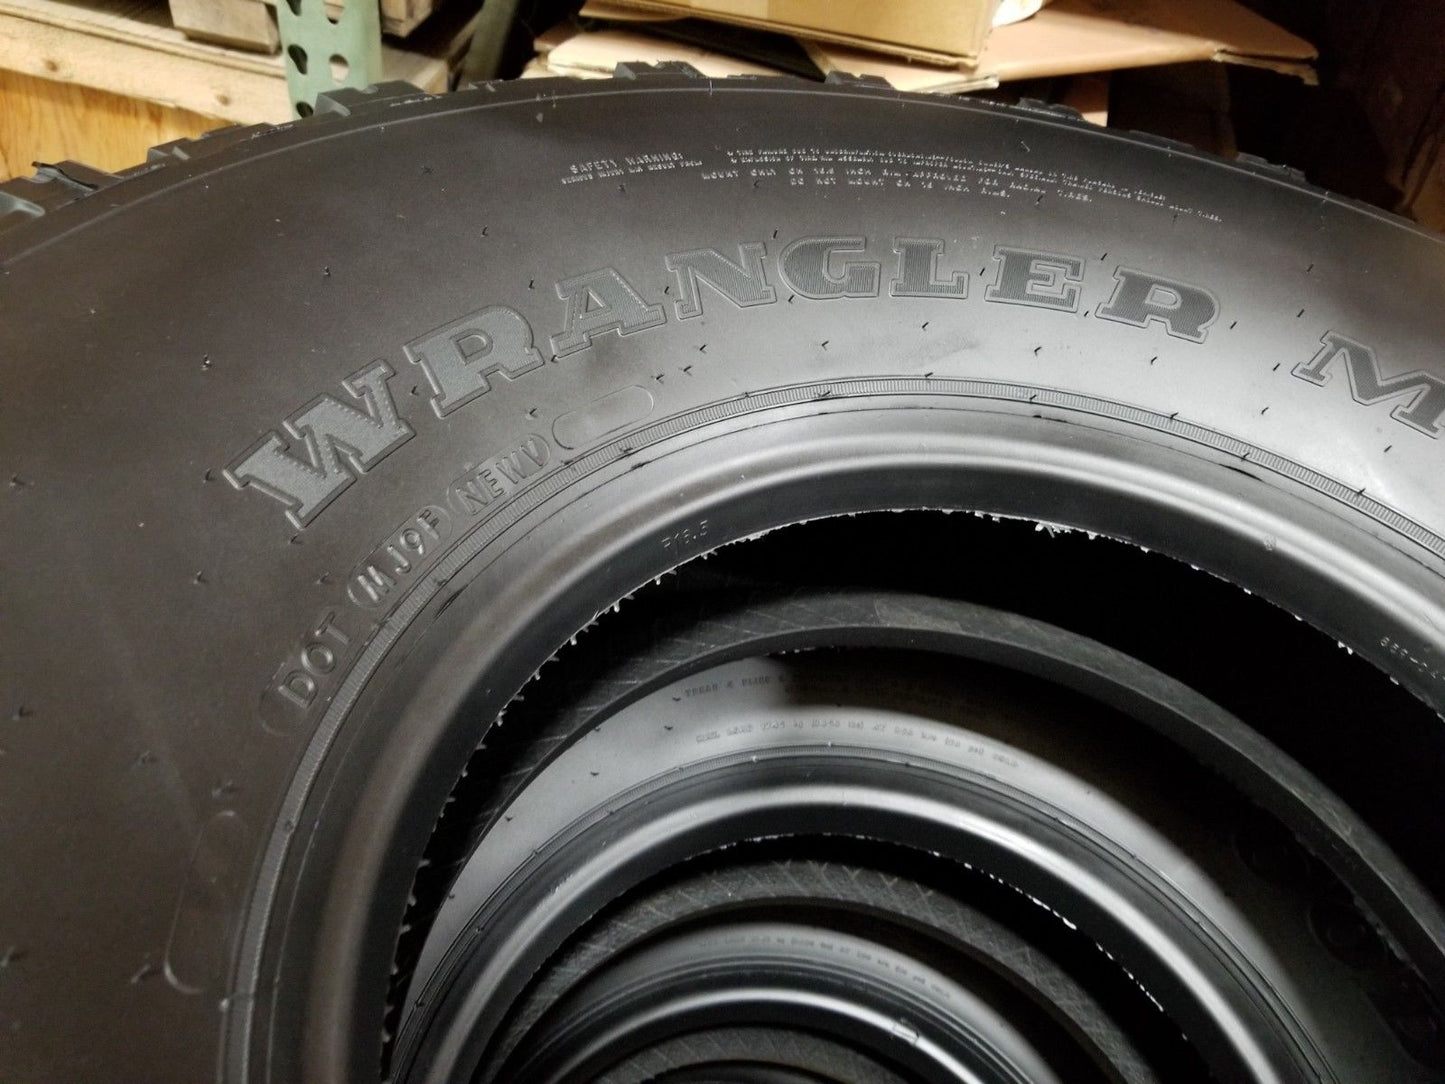 NEW  HUMVEE HMMWV TIRE WITH  GOODYEAR  M998 HUMMER H1 37X12.5X16.5 RADIAL